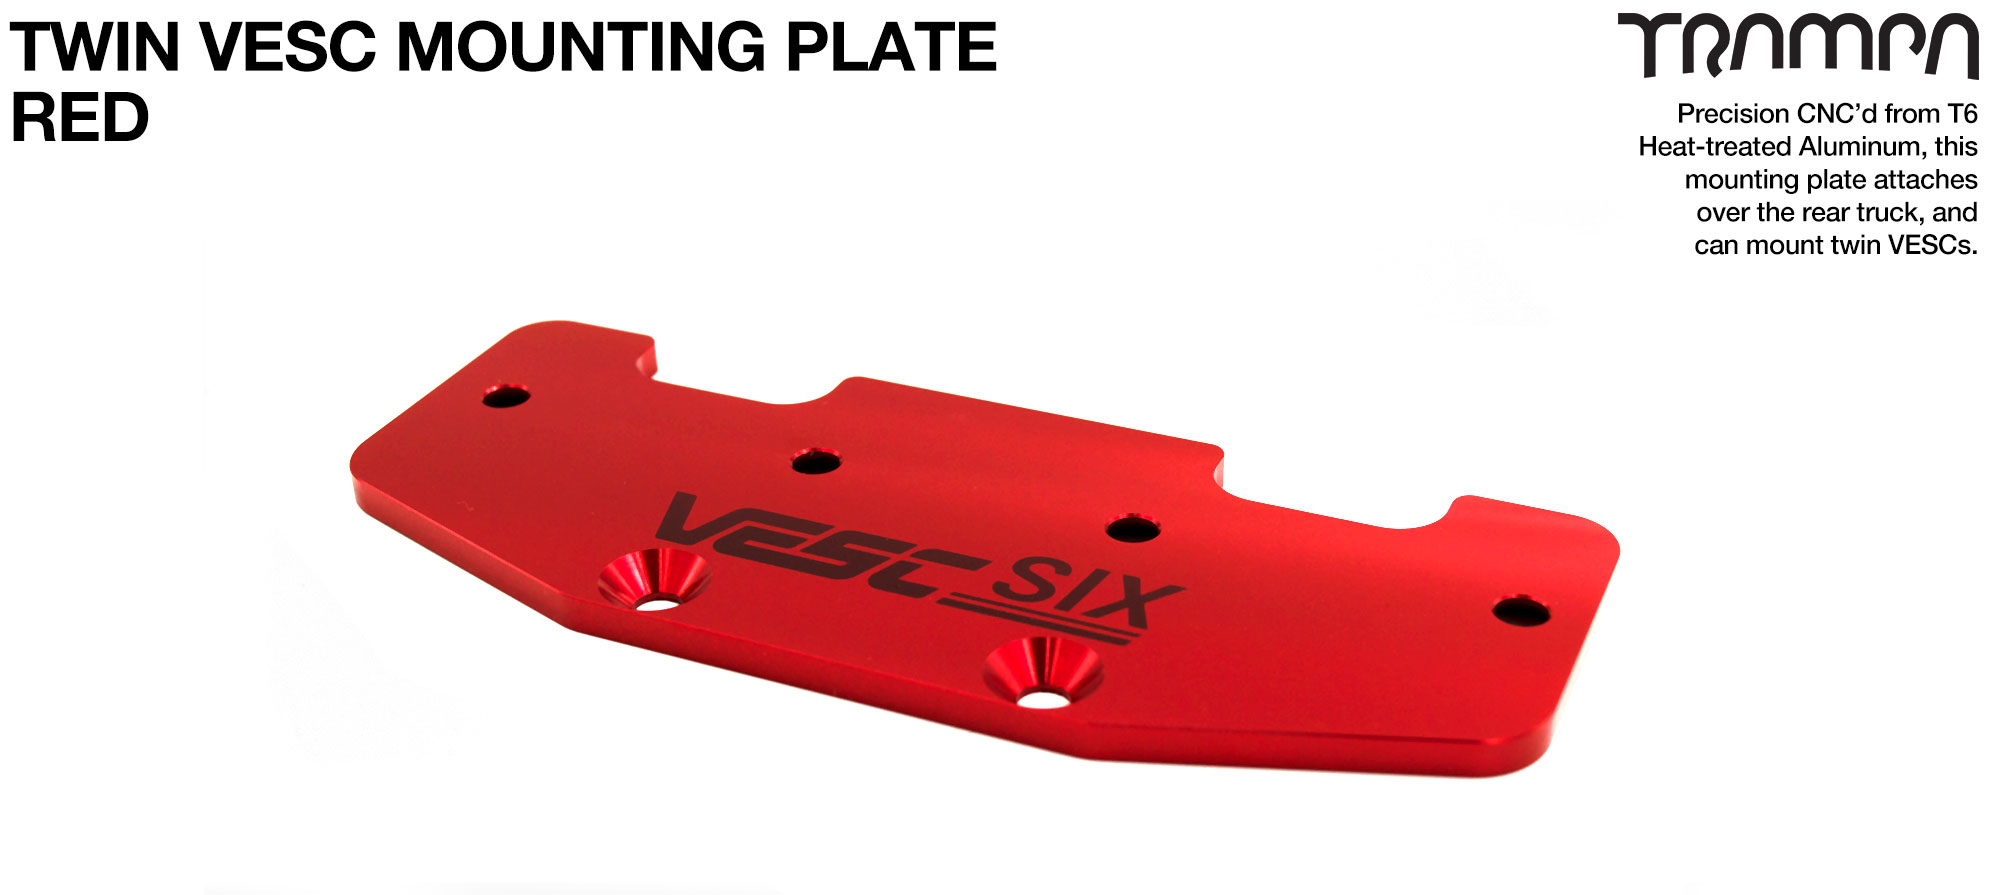 ALUMINIUM mounting Plate for TWIN VESC 6 - Anodised RED 